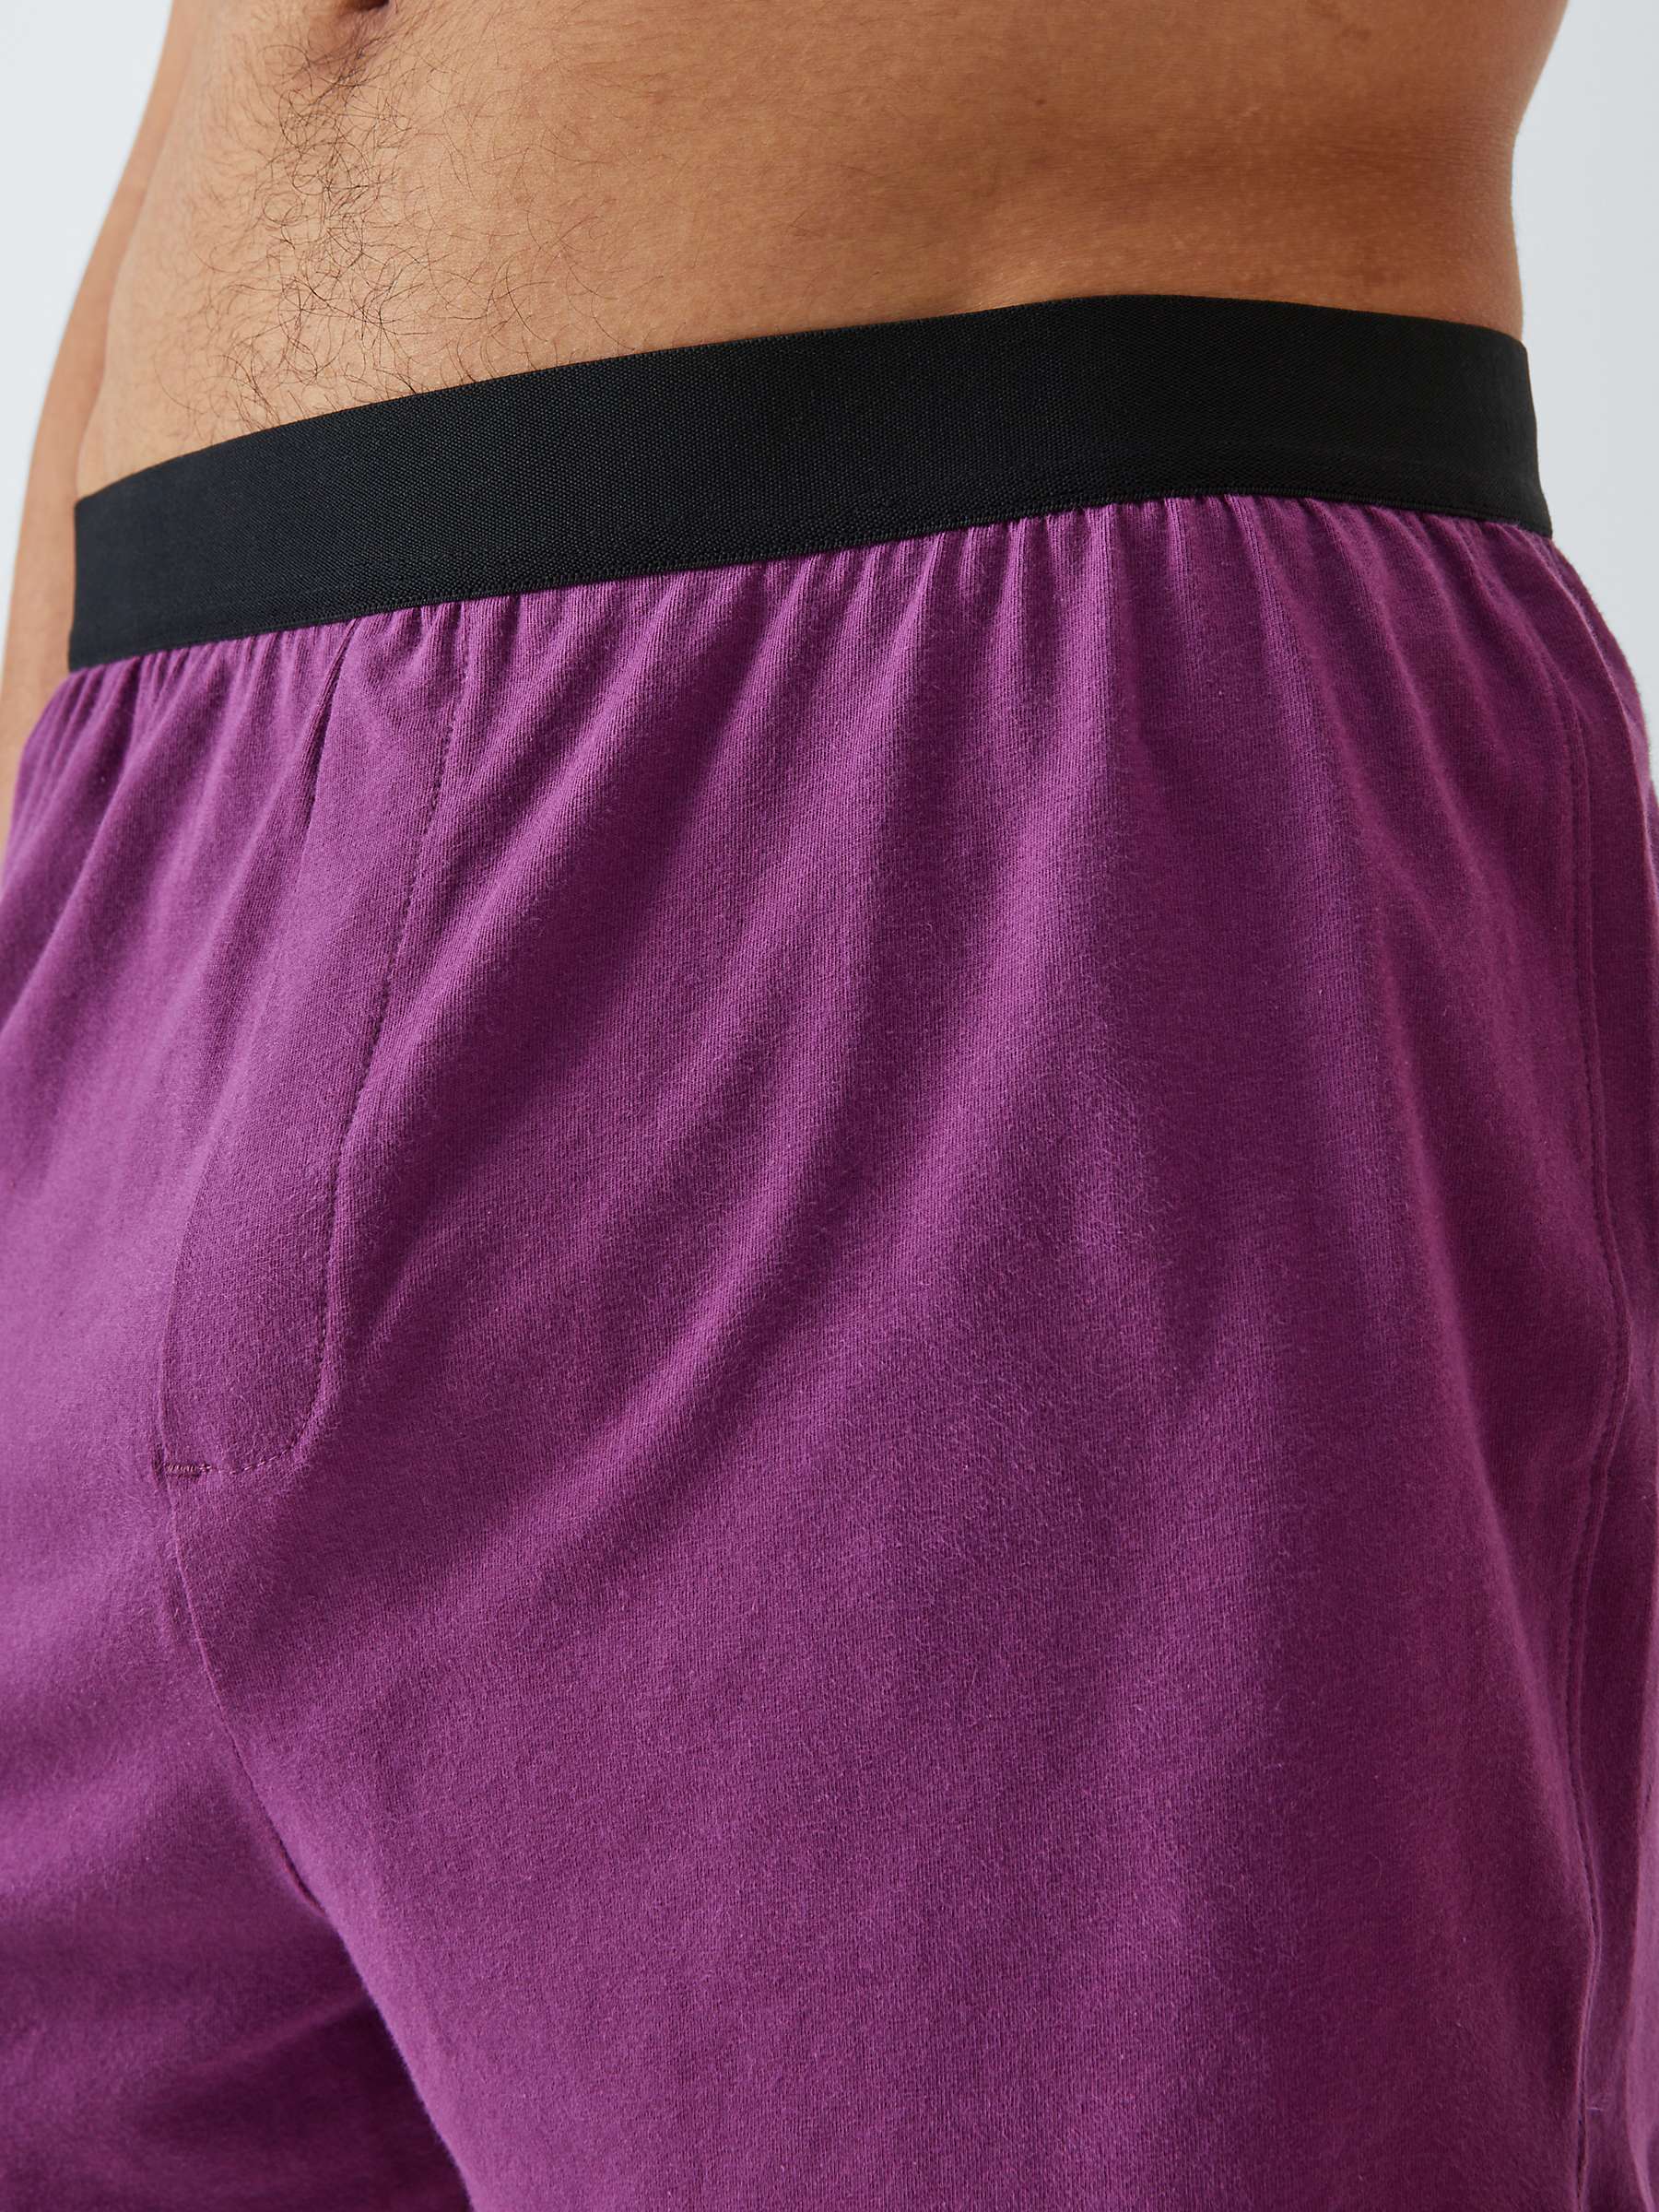 Buy John Lewis ANYDAY Cotton Boxers, Pack of 5, Plain Online at johnlewis.com